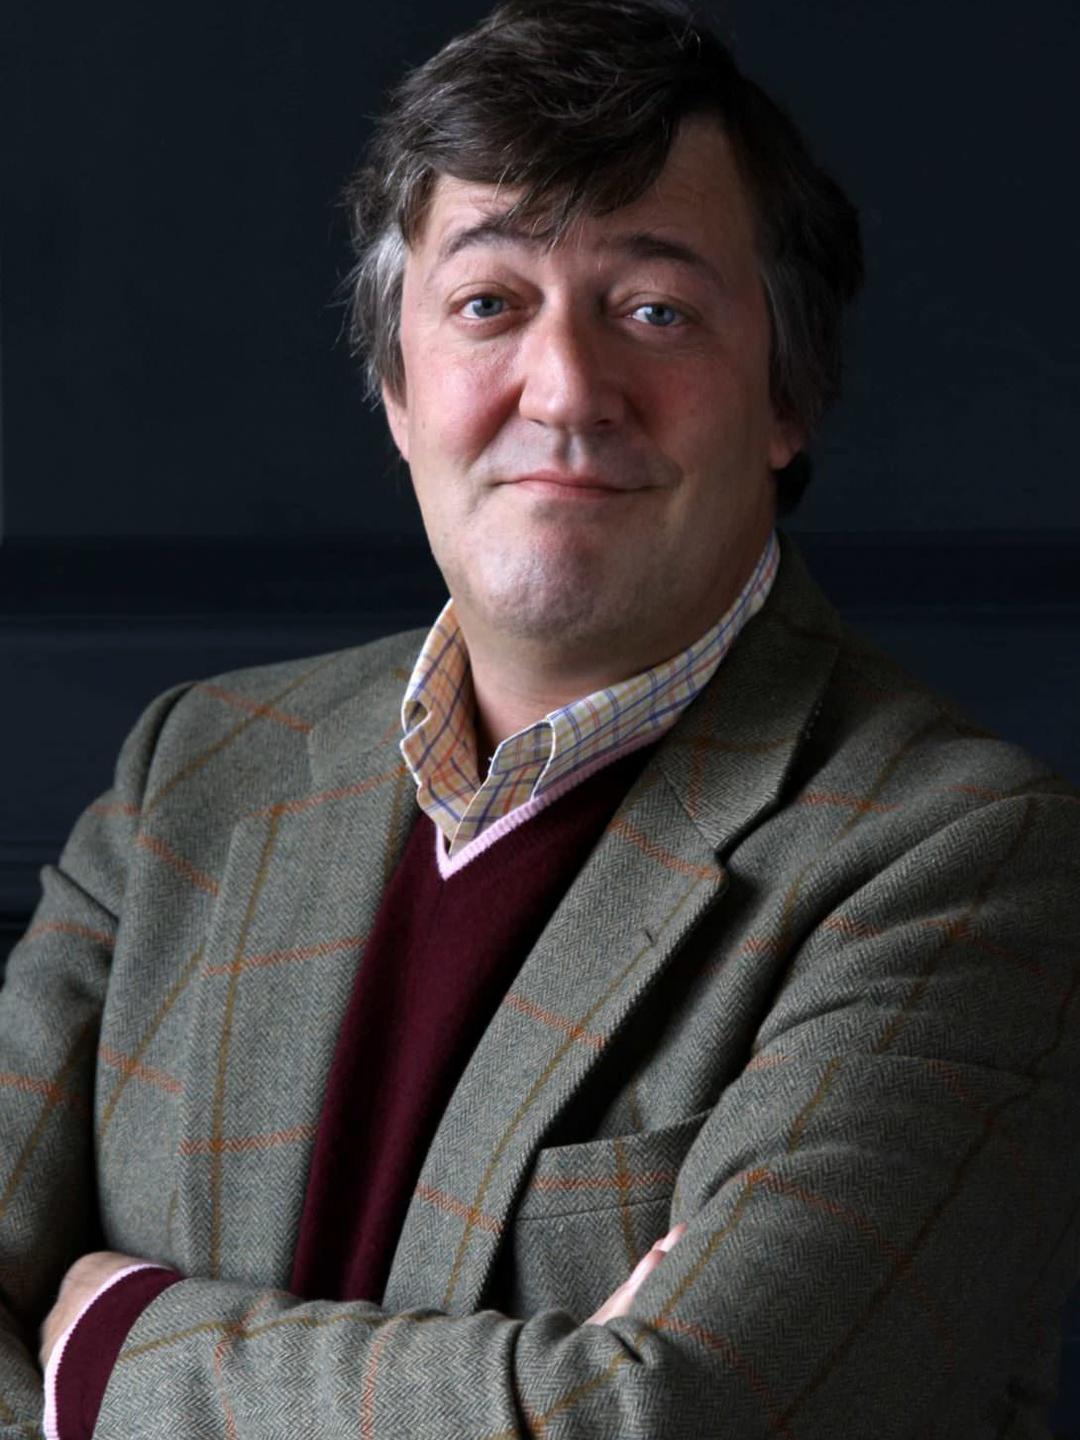 Stephen Fry how did he became famous